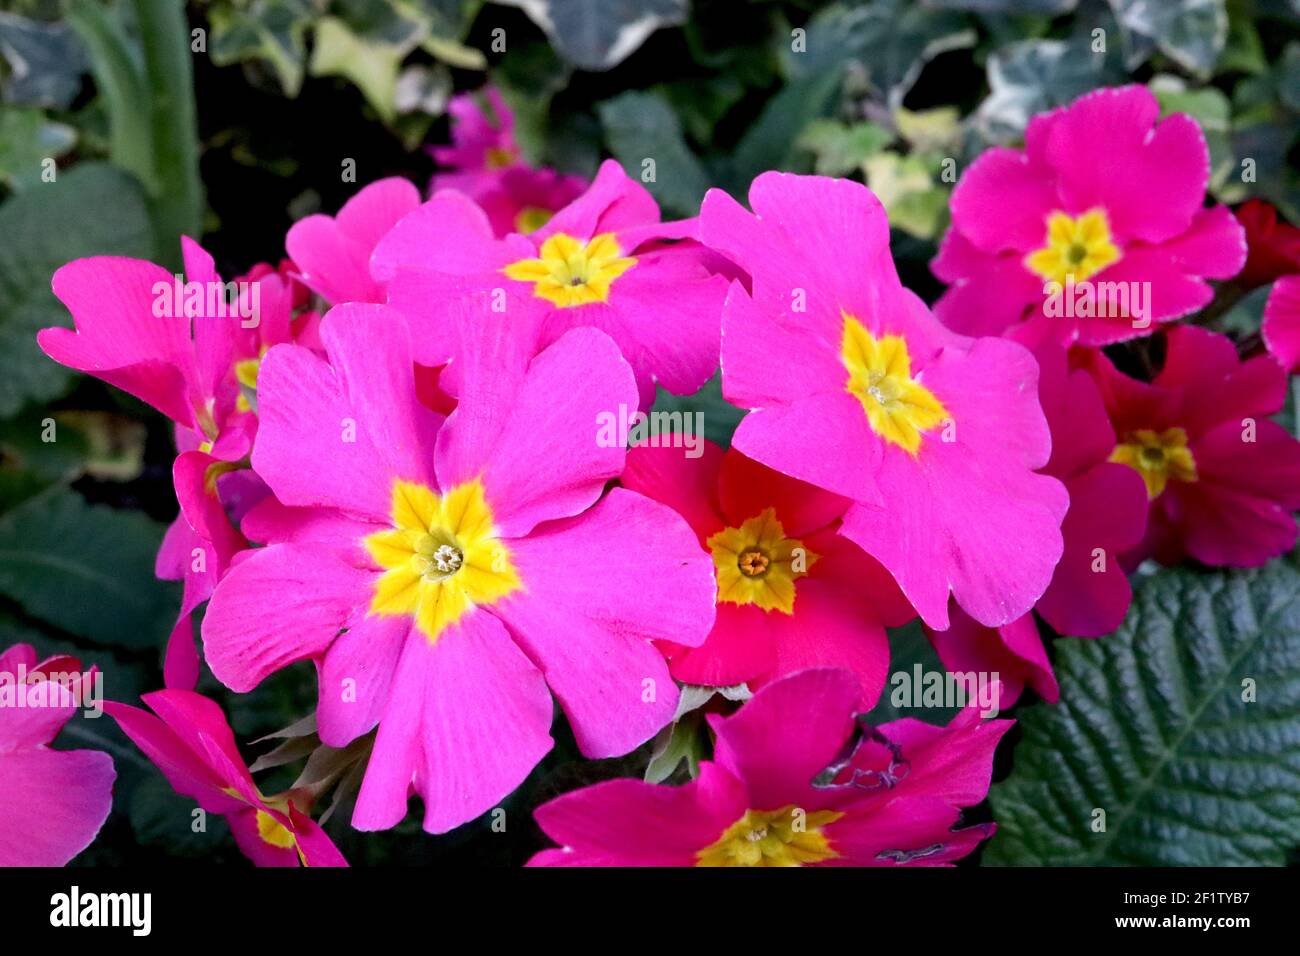 Primula polyanthus ‘Crescendo Bright Rose’ pink primroses with yellow centres,   March, England, UK Stock Photo